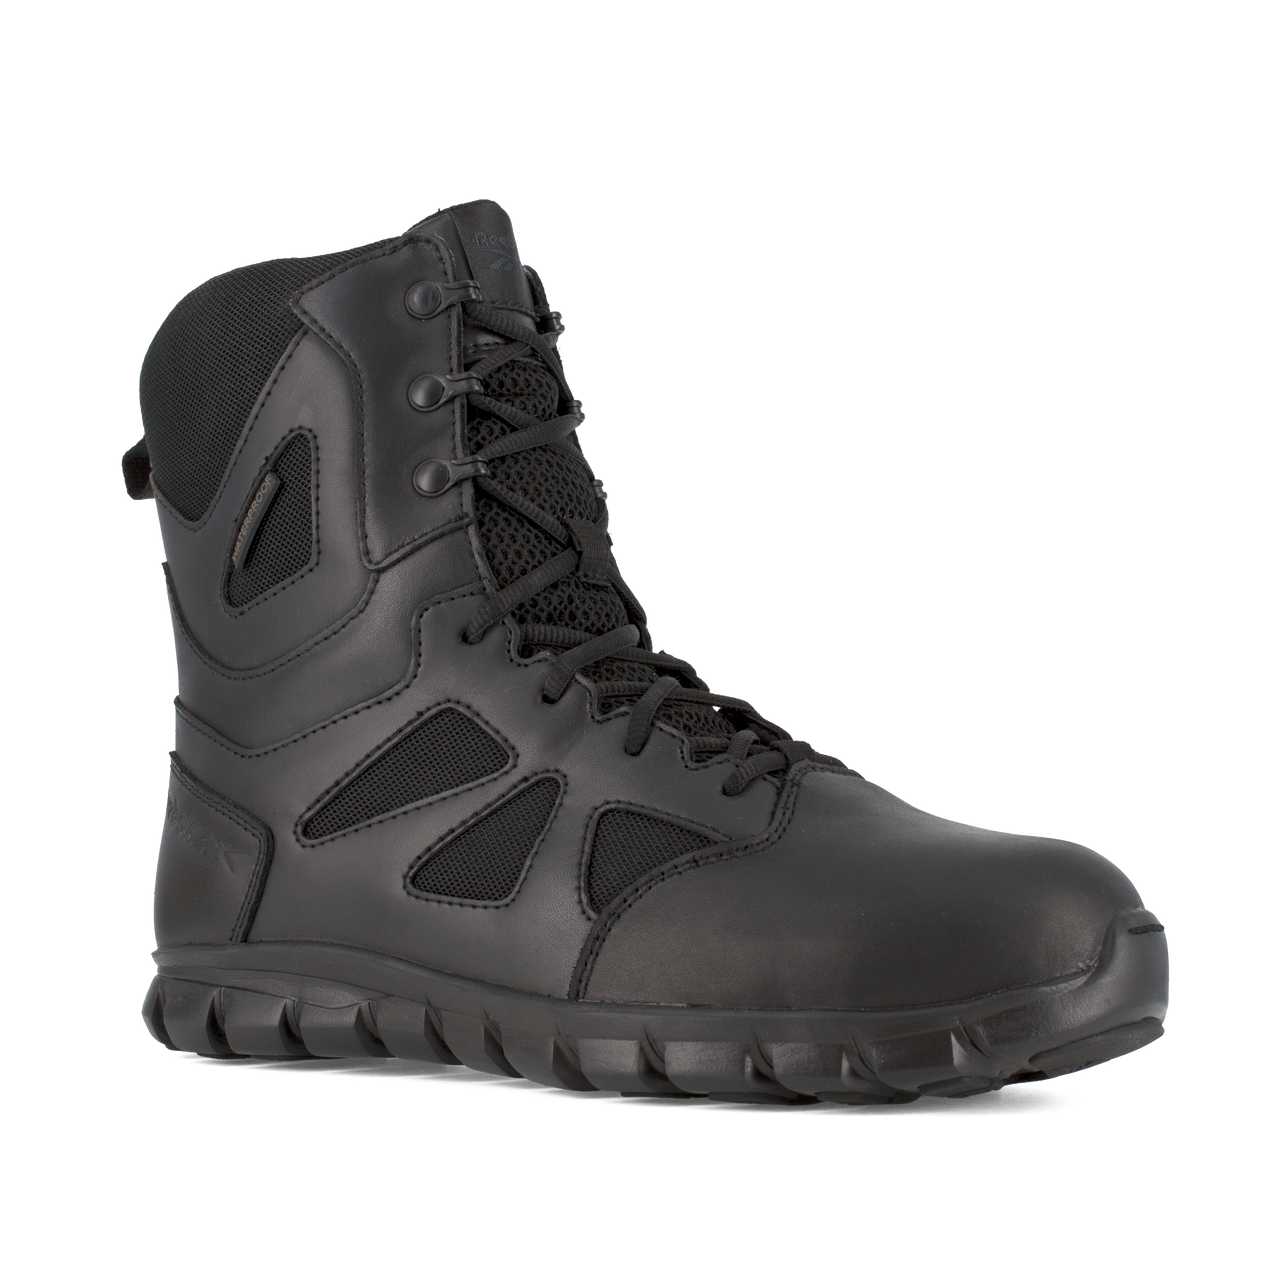 Sublite Cushion Tactical - RB8807 - Men's 8" Tactical Boot - Reebok Work